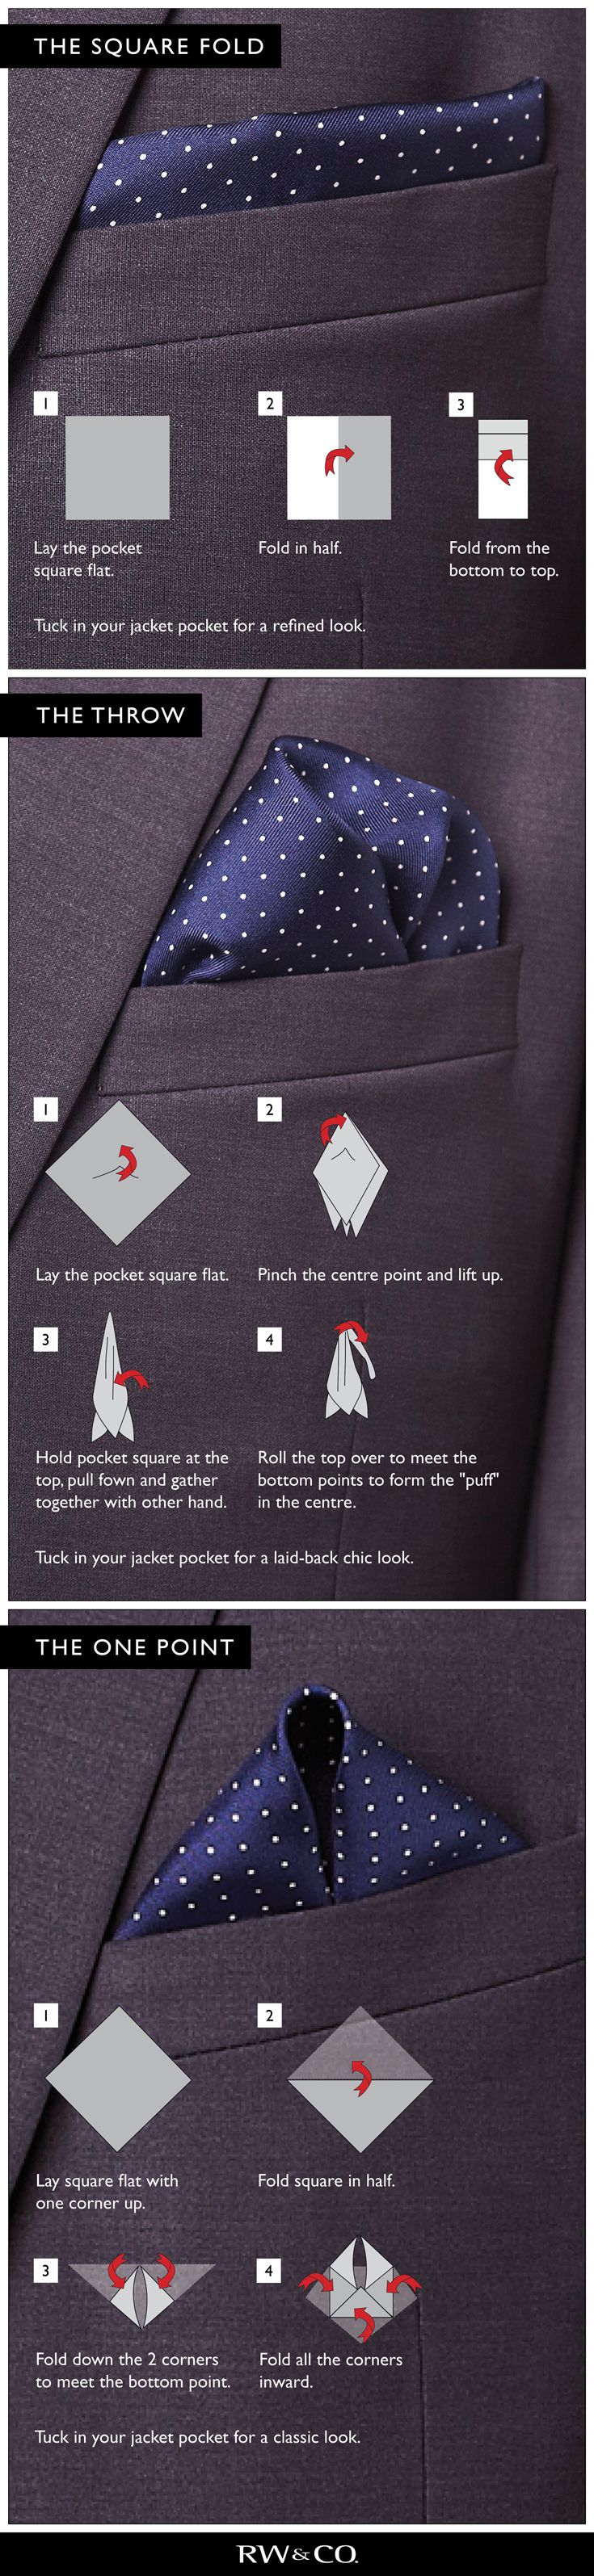 how to fold a pocket square for a tuxedo